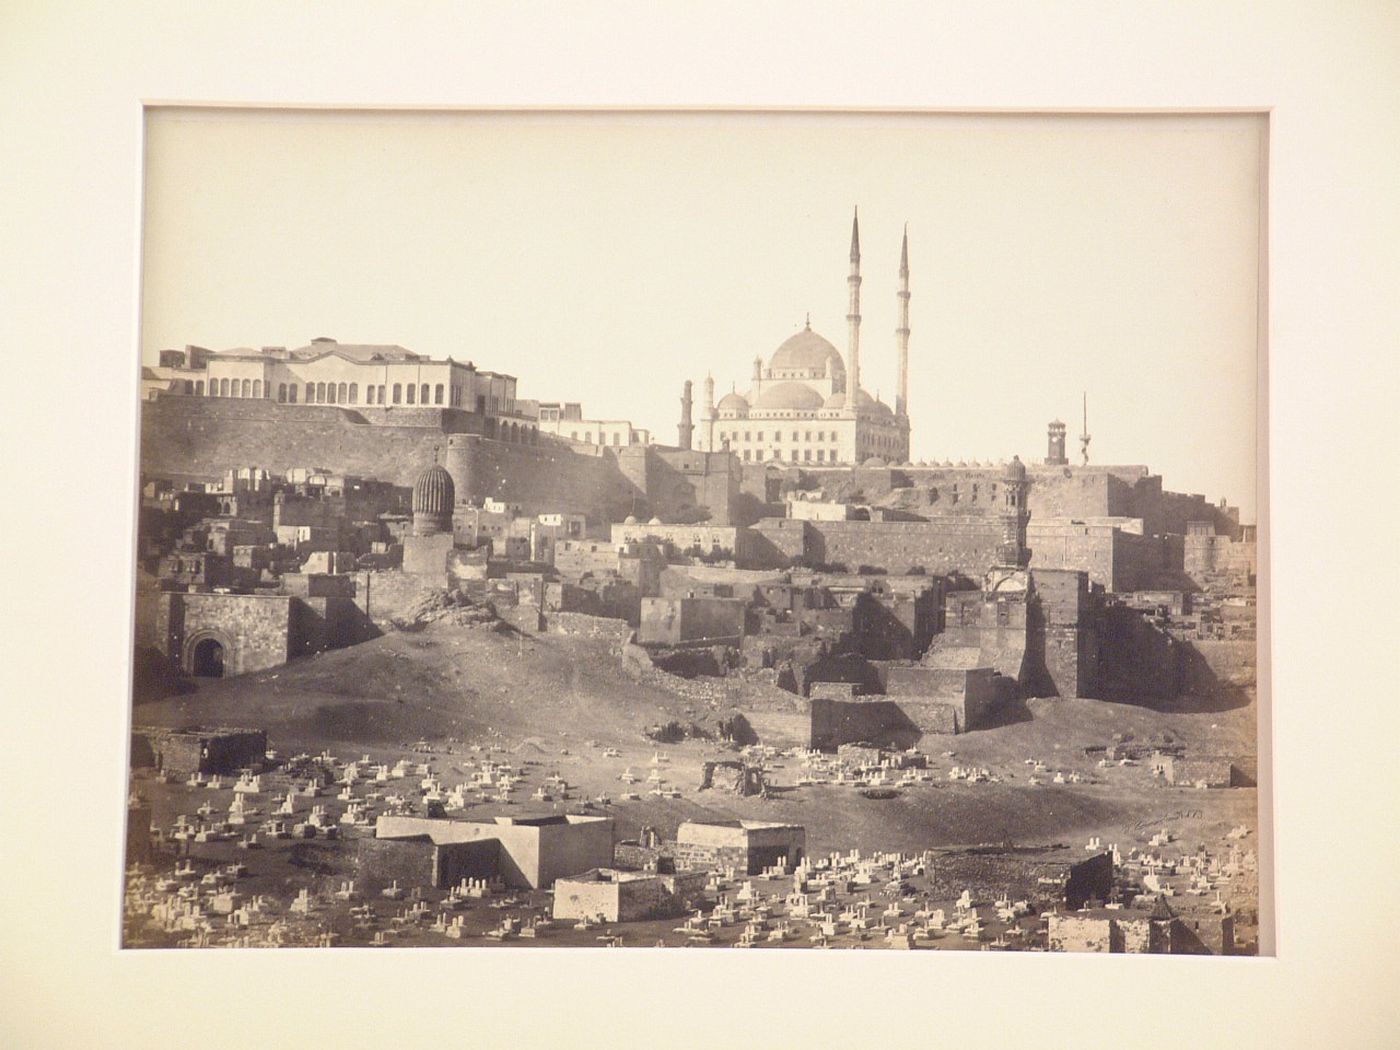 View of the Citadel and the Muhammad Ali Mosque, Cairo, Egypt